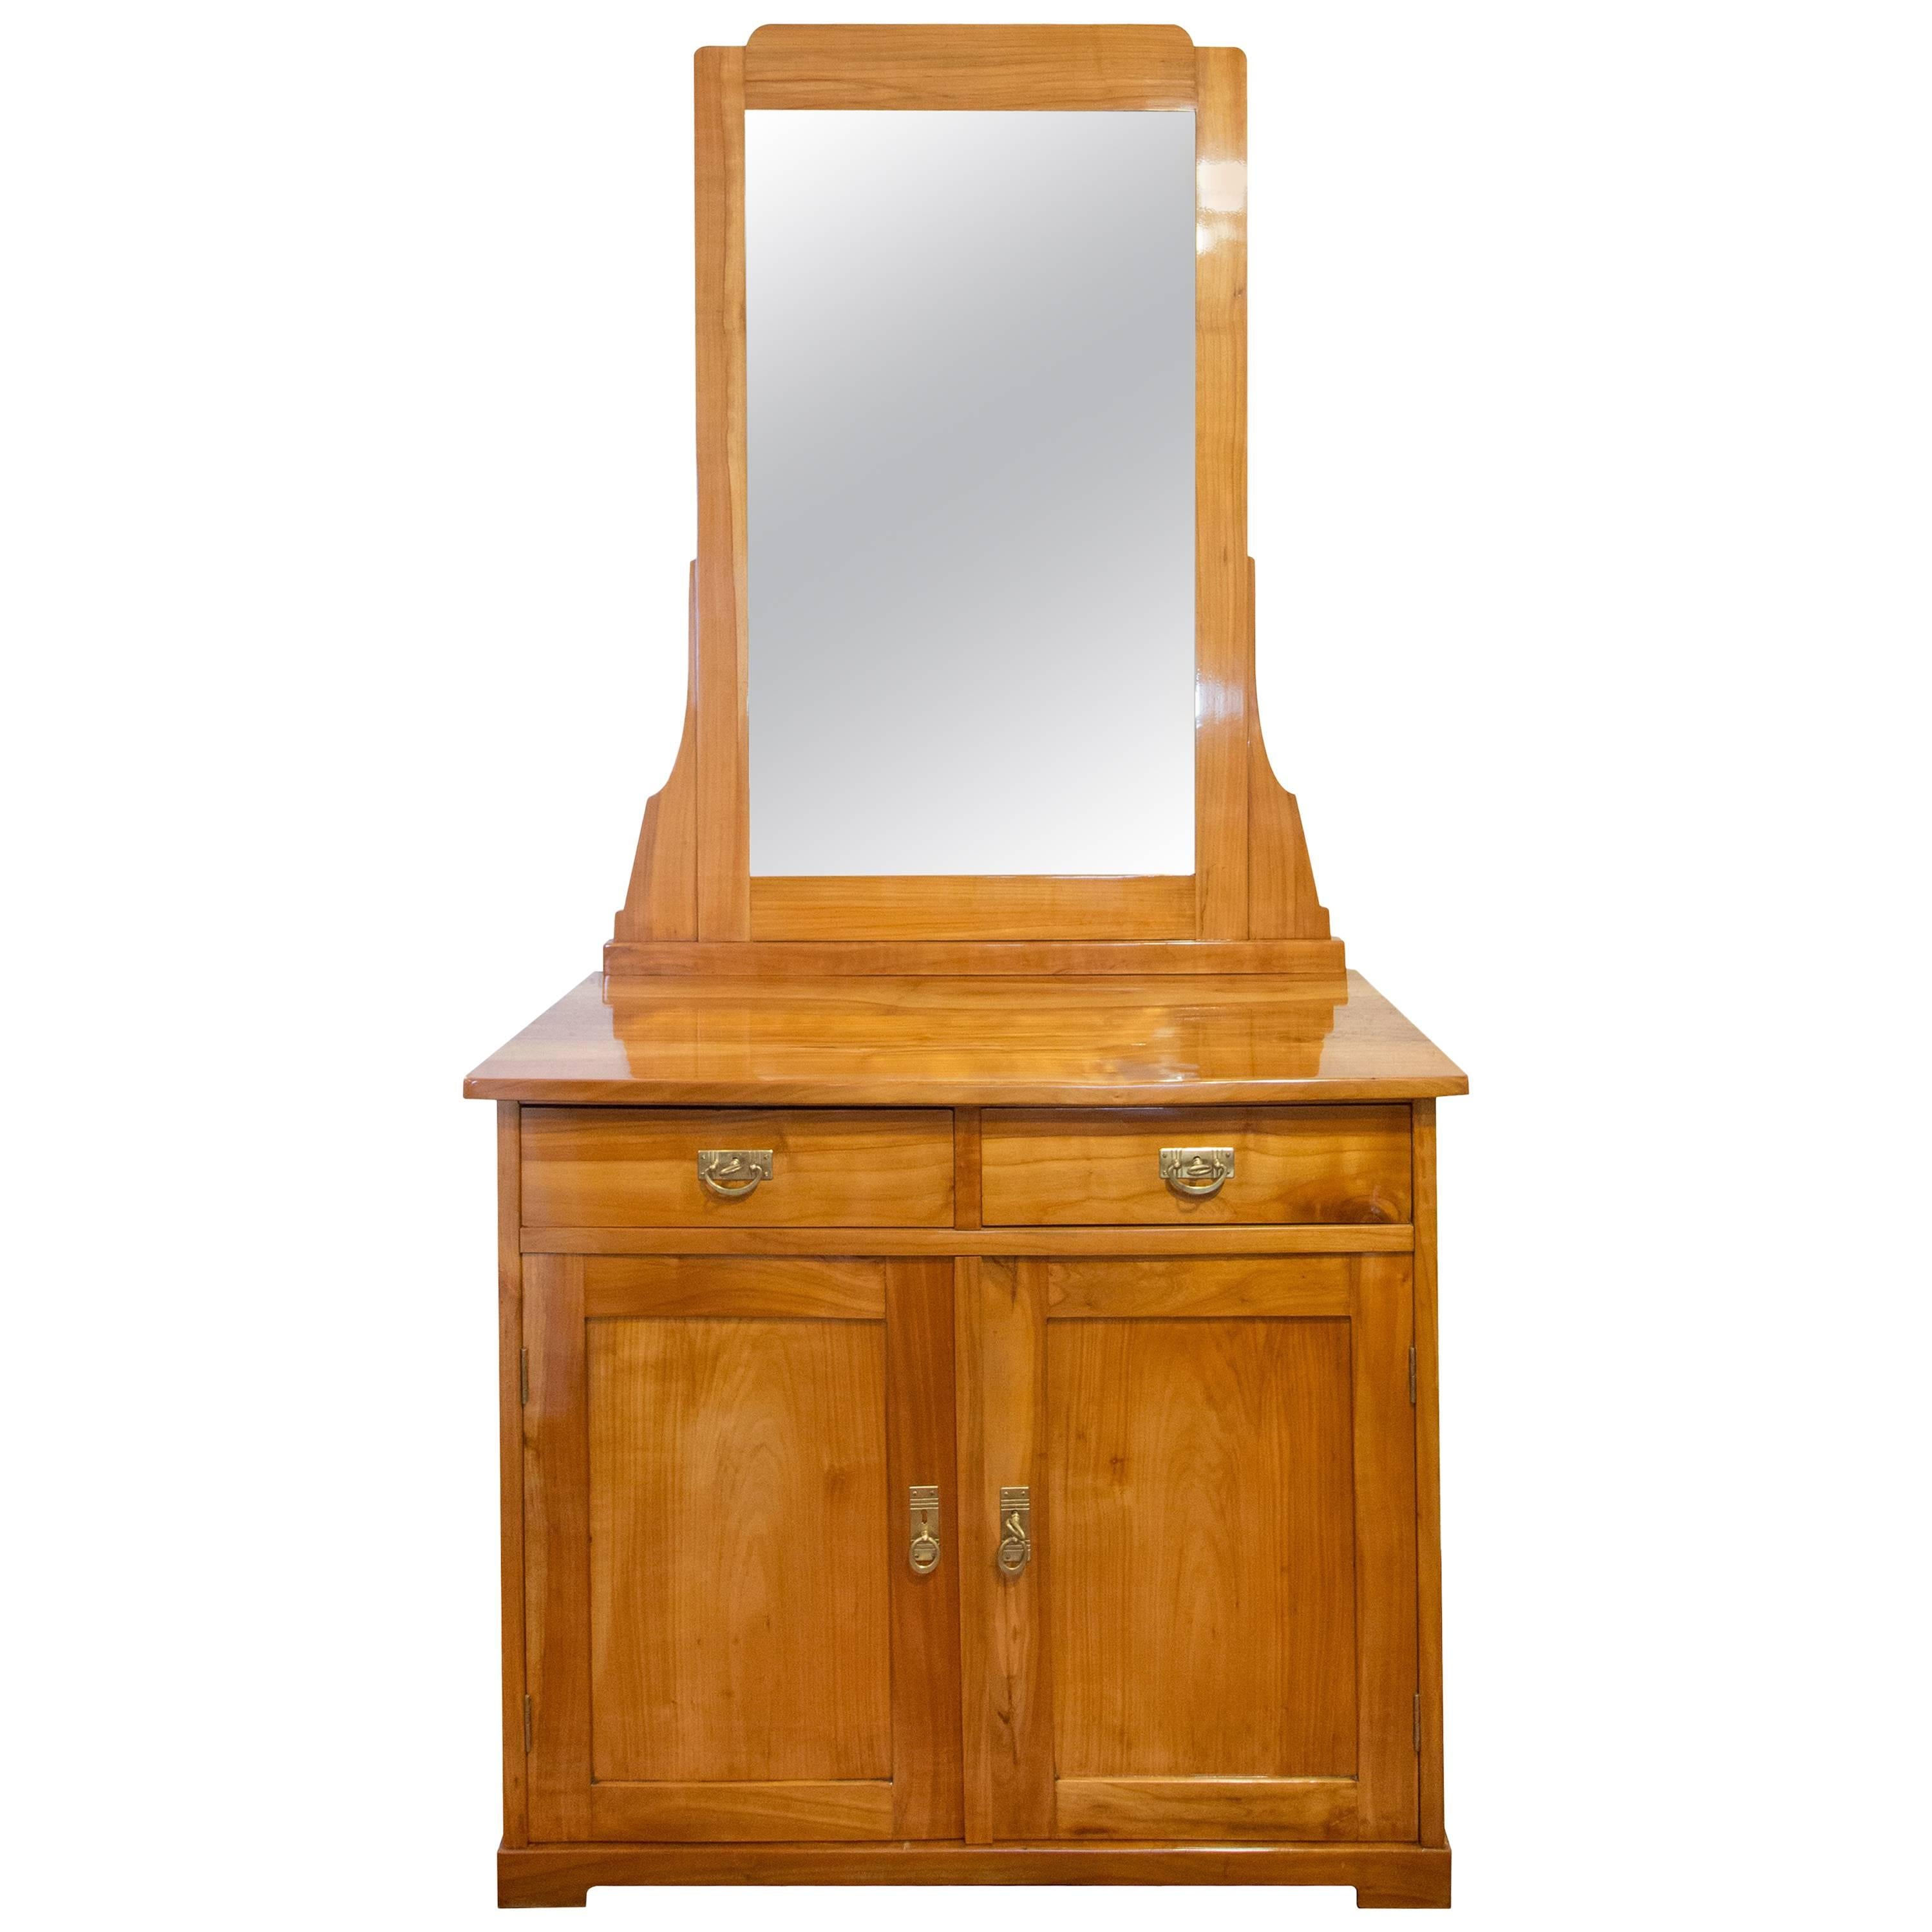 Art Nouveau Cherry Cabinet with Mirror or Vanity Cabinet